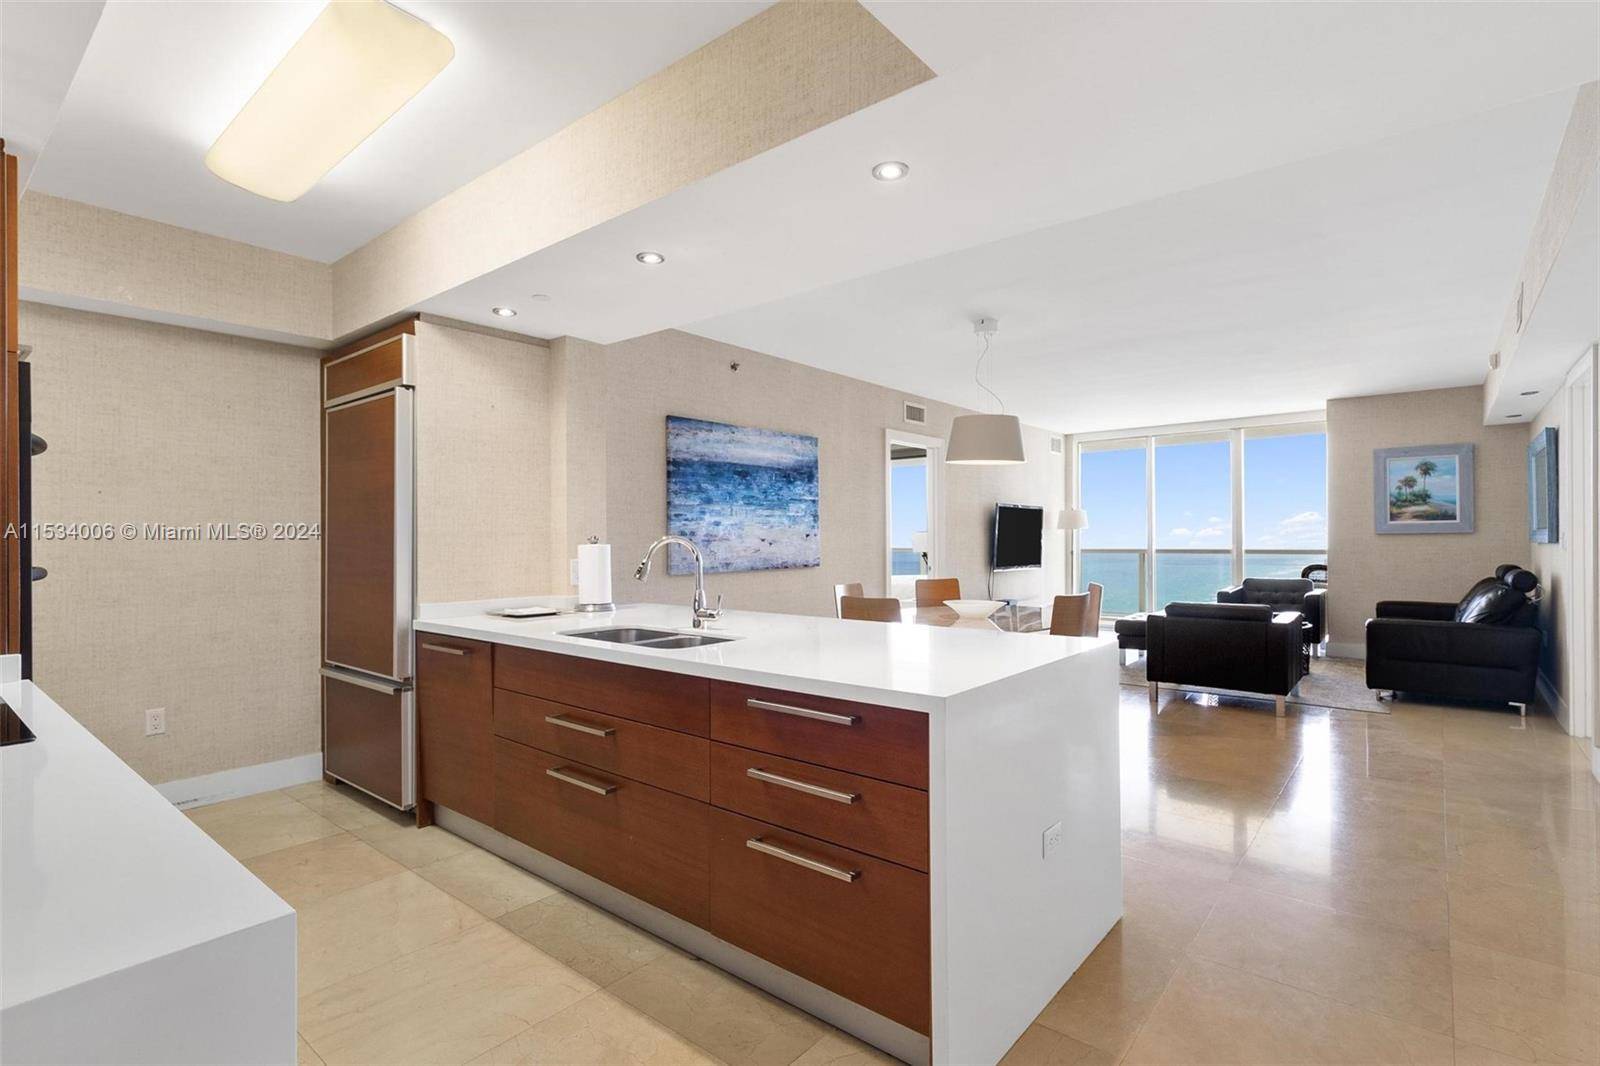 Furnished with elegance, this stunning residence offers breathtaking ocean and Intracoastal views.